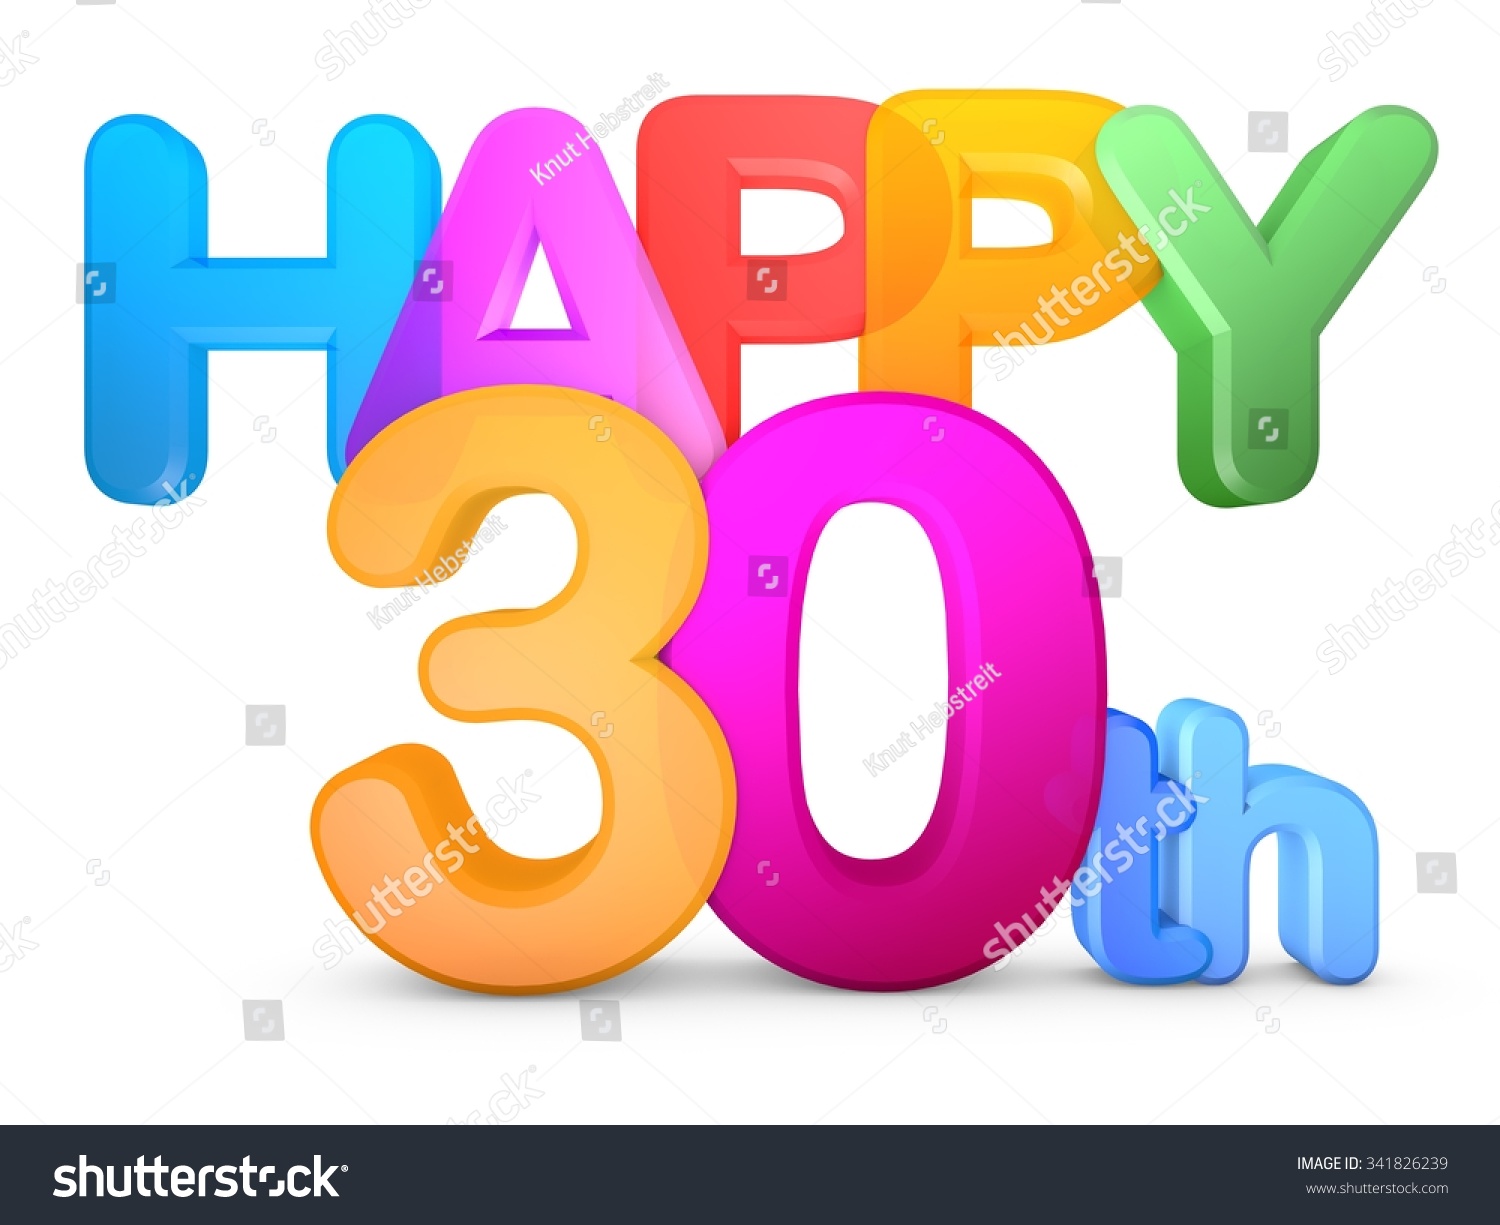 Happy 30th Title Big Letters Stock Illustration 341826239 - Shutterstock